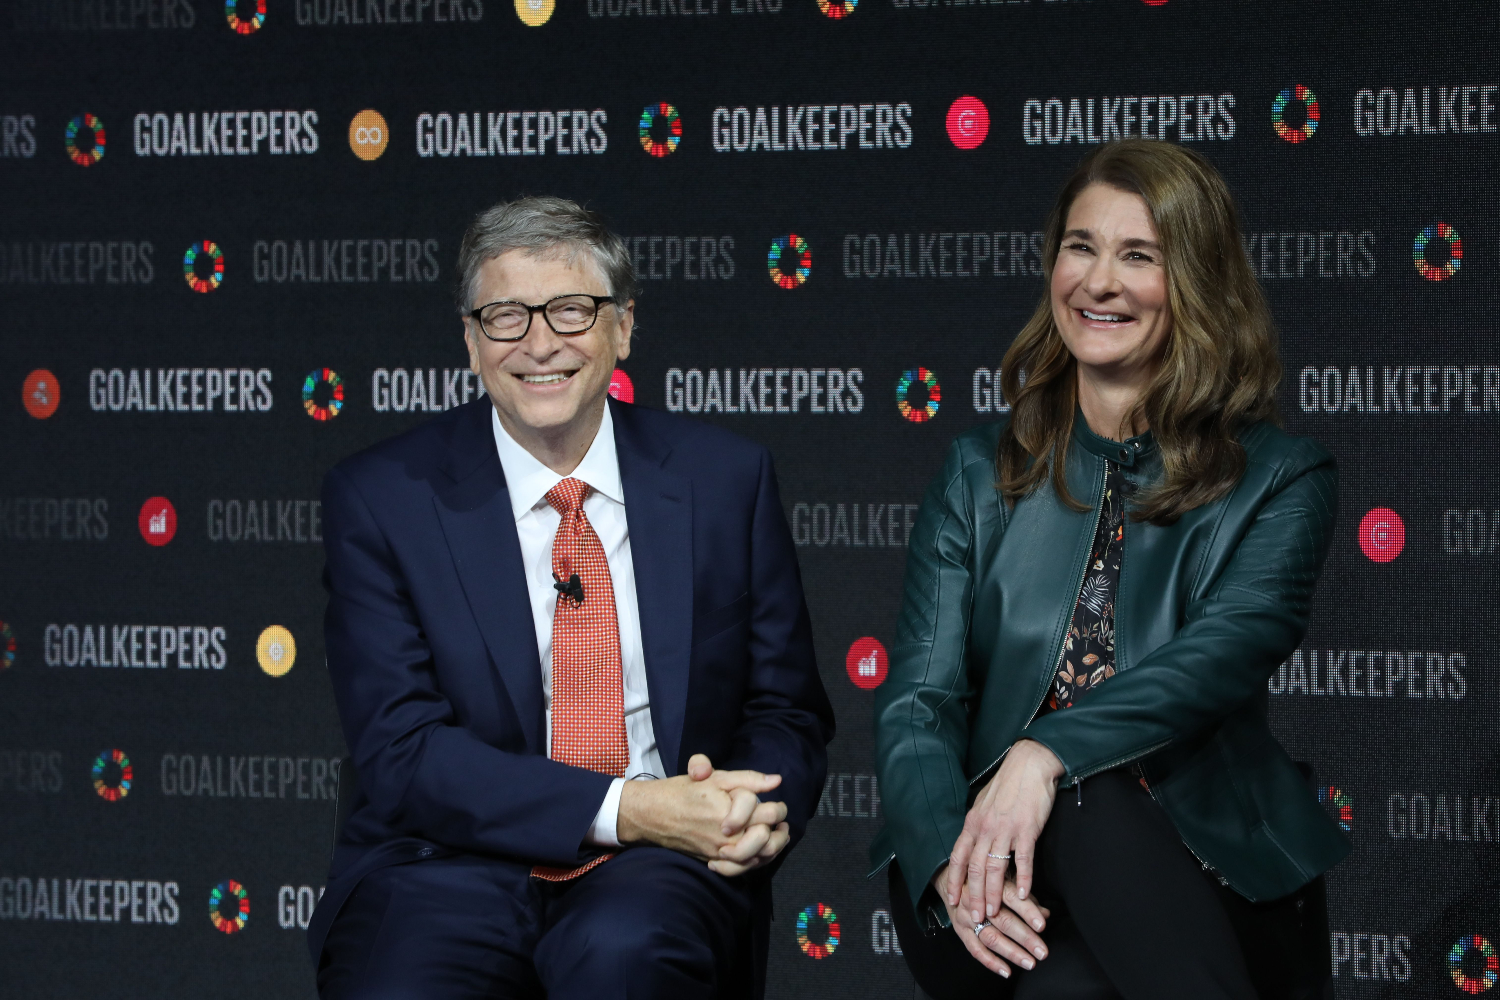 Bill and Melinda Gates sit smiling side-by-side during the Goalkeepers event at the Lincoln Center